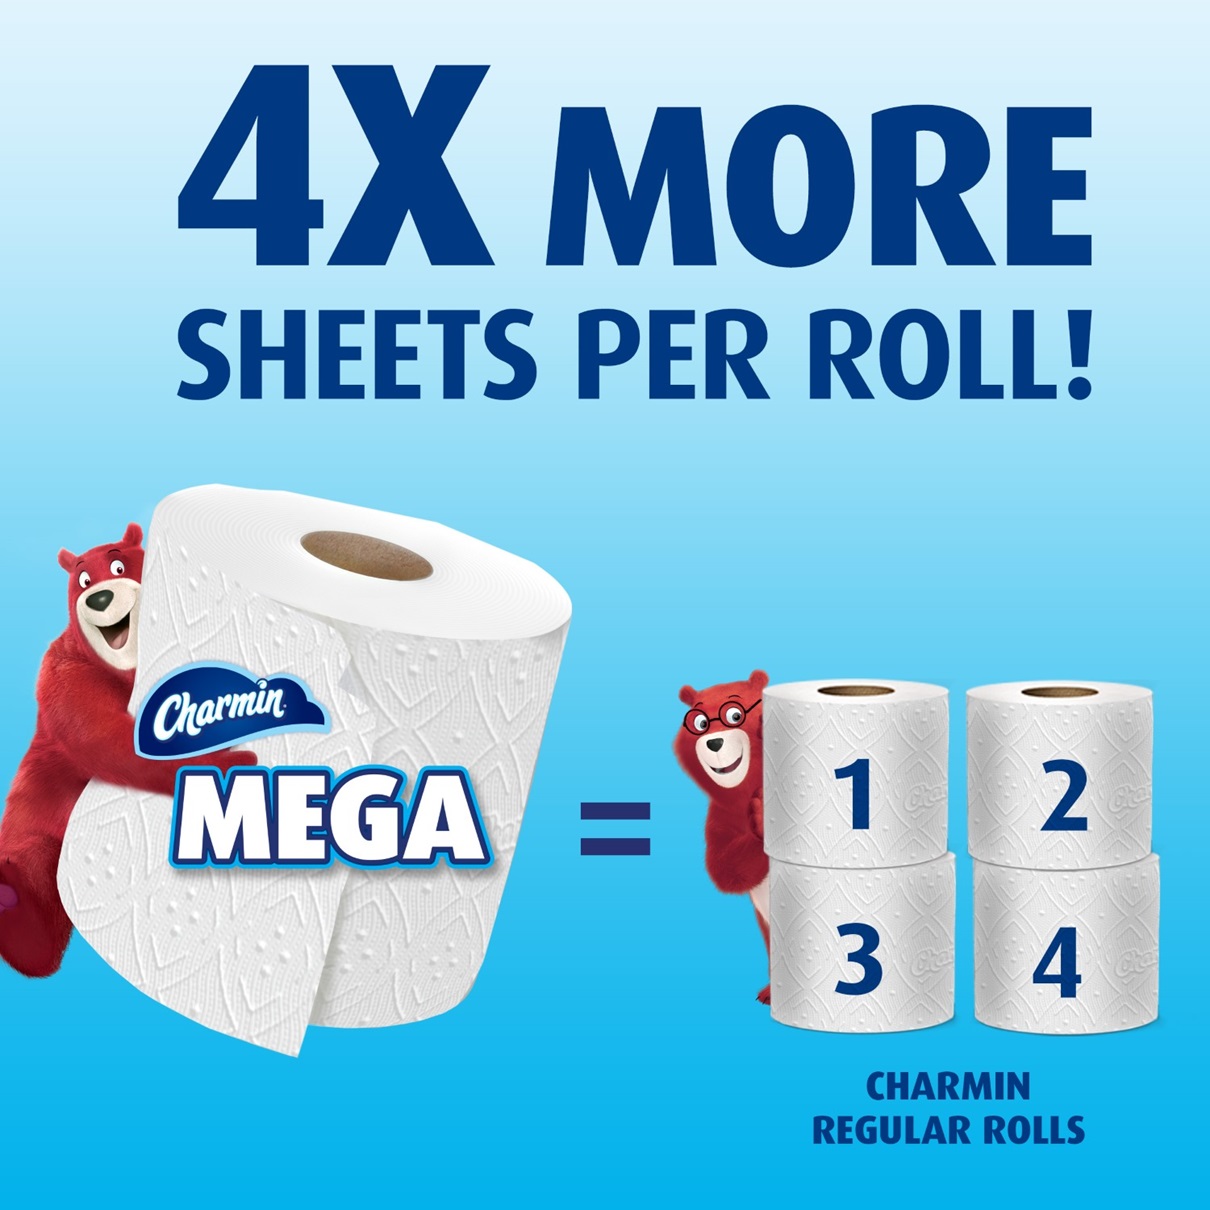 Get 4X more sheets per roll with ultra strong mega roll